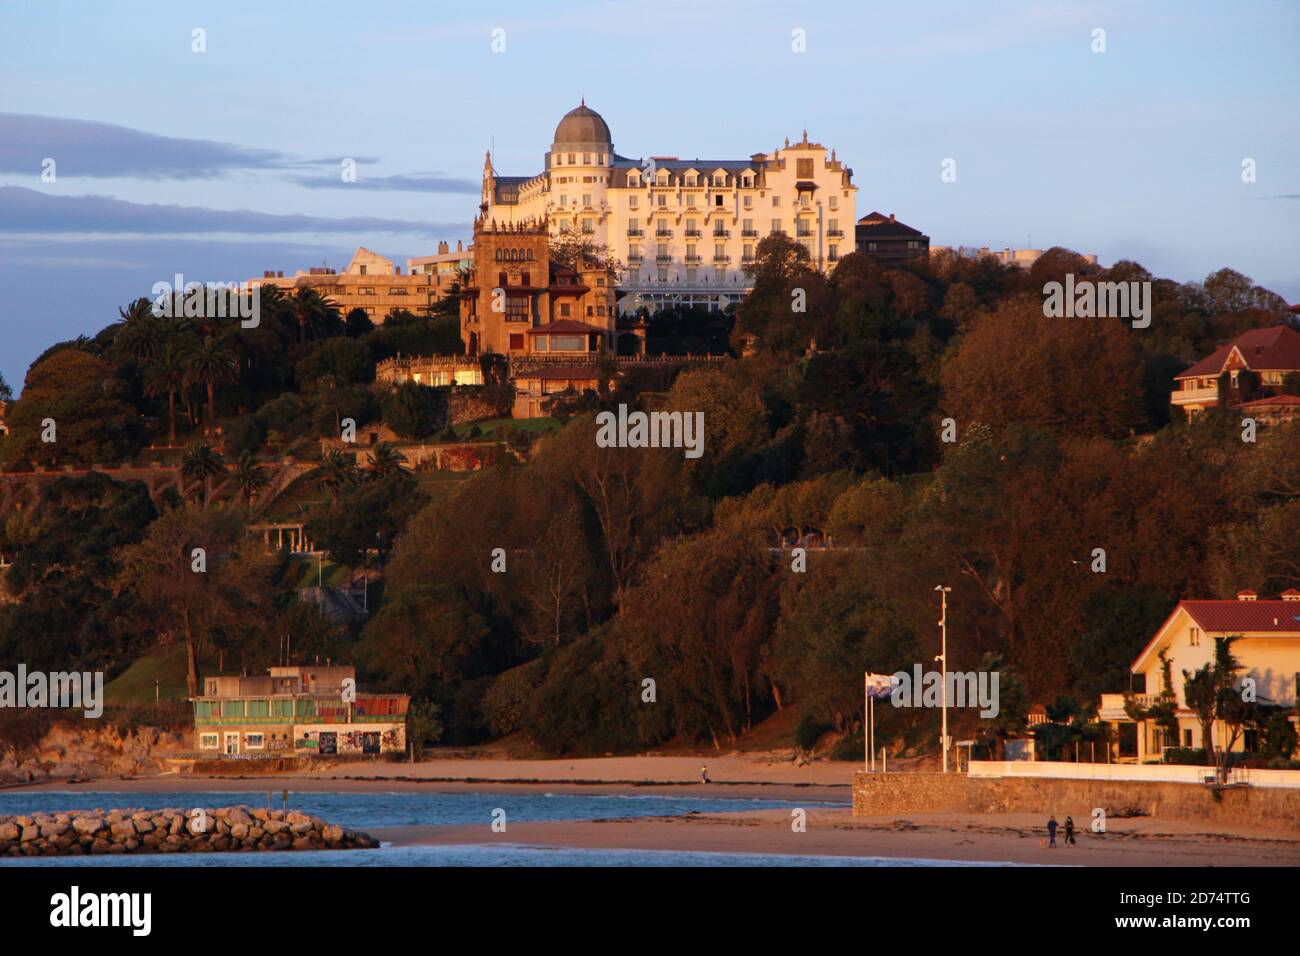 Hotel Real on top of a hill in early morning orange sunlight seen from the Playa de los Bikinis Magdalena Peninsular Santander Cantabria Spain Stock Photo